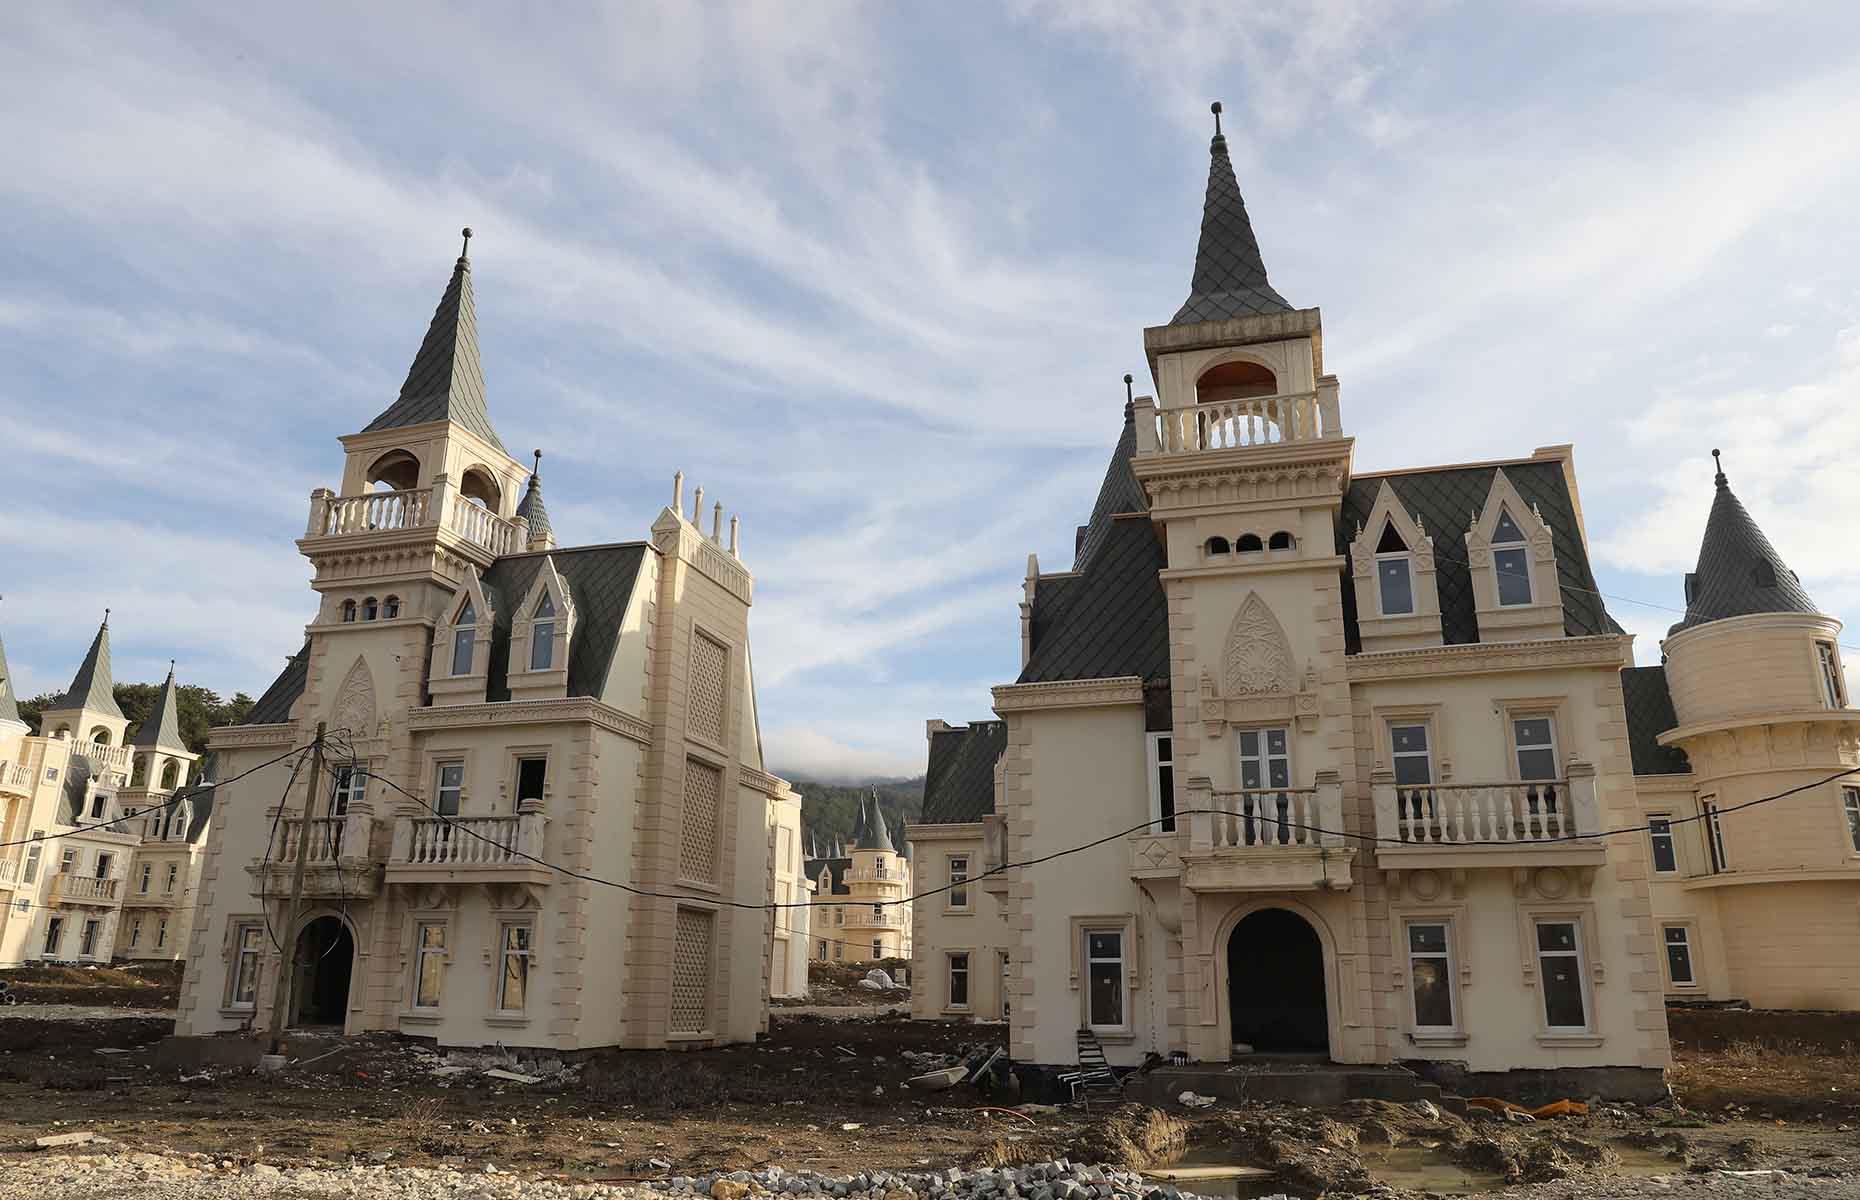 <p>Once complete, the complex was intended to accommodate 732 villas, a shopping center, movie theater, restaurants and fitness facilities. Worth between $400,000 and $500,000, the identical three-story castle-like homes, which look like something from the pages of <em>Cinderella</em>, feature turrets and elaborate circular balconies.</p>